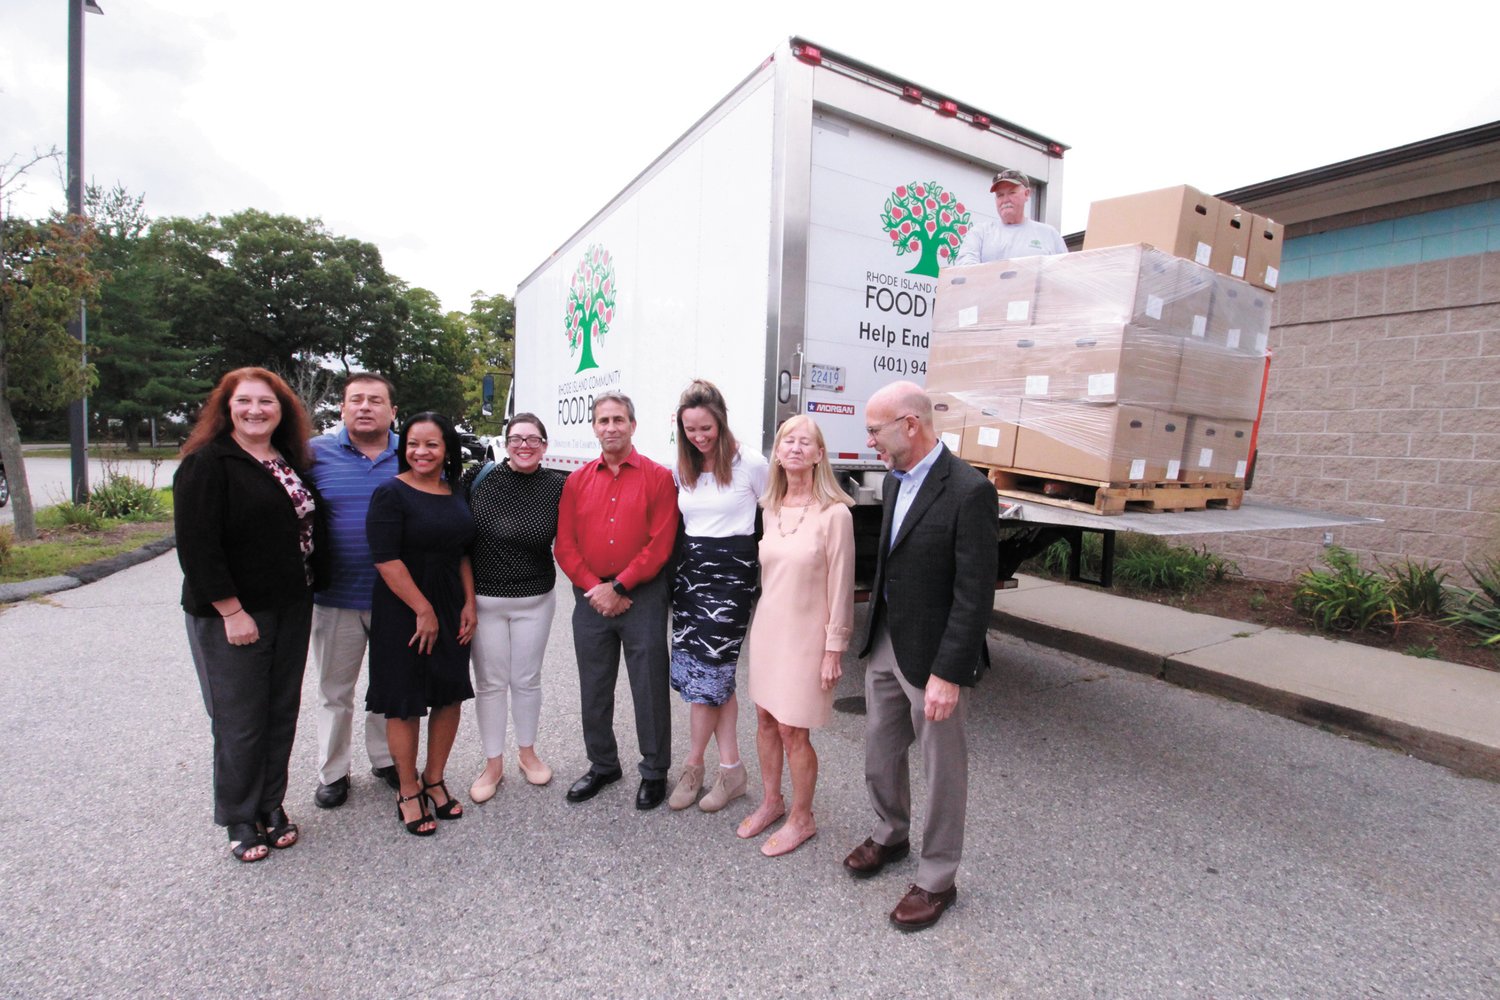 BOX DROP OFF: Officials with Mayor Frank Picozzi in the center  gather for a group photo outside the Pilgrim Senior Center as a Rhode Island Community Food Bank pulls up to deliver food boxes for distribution.